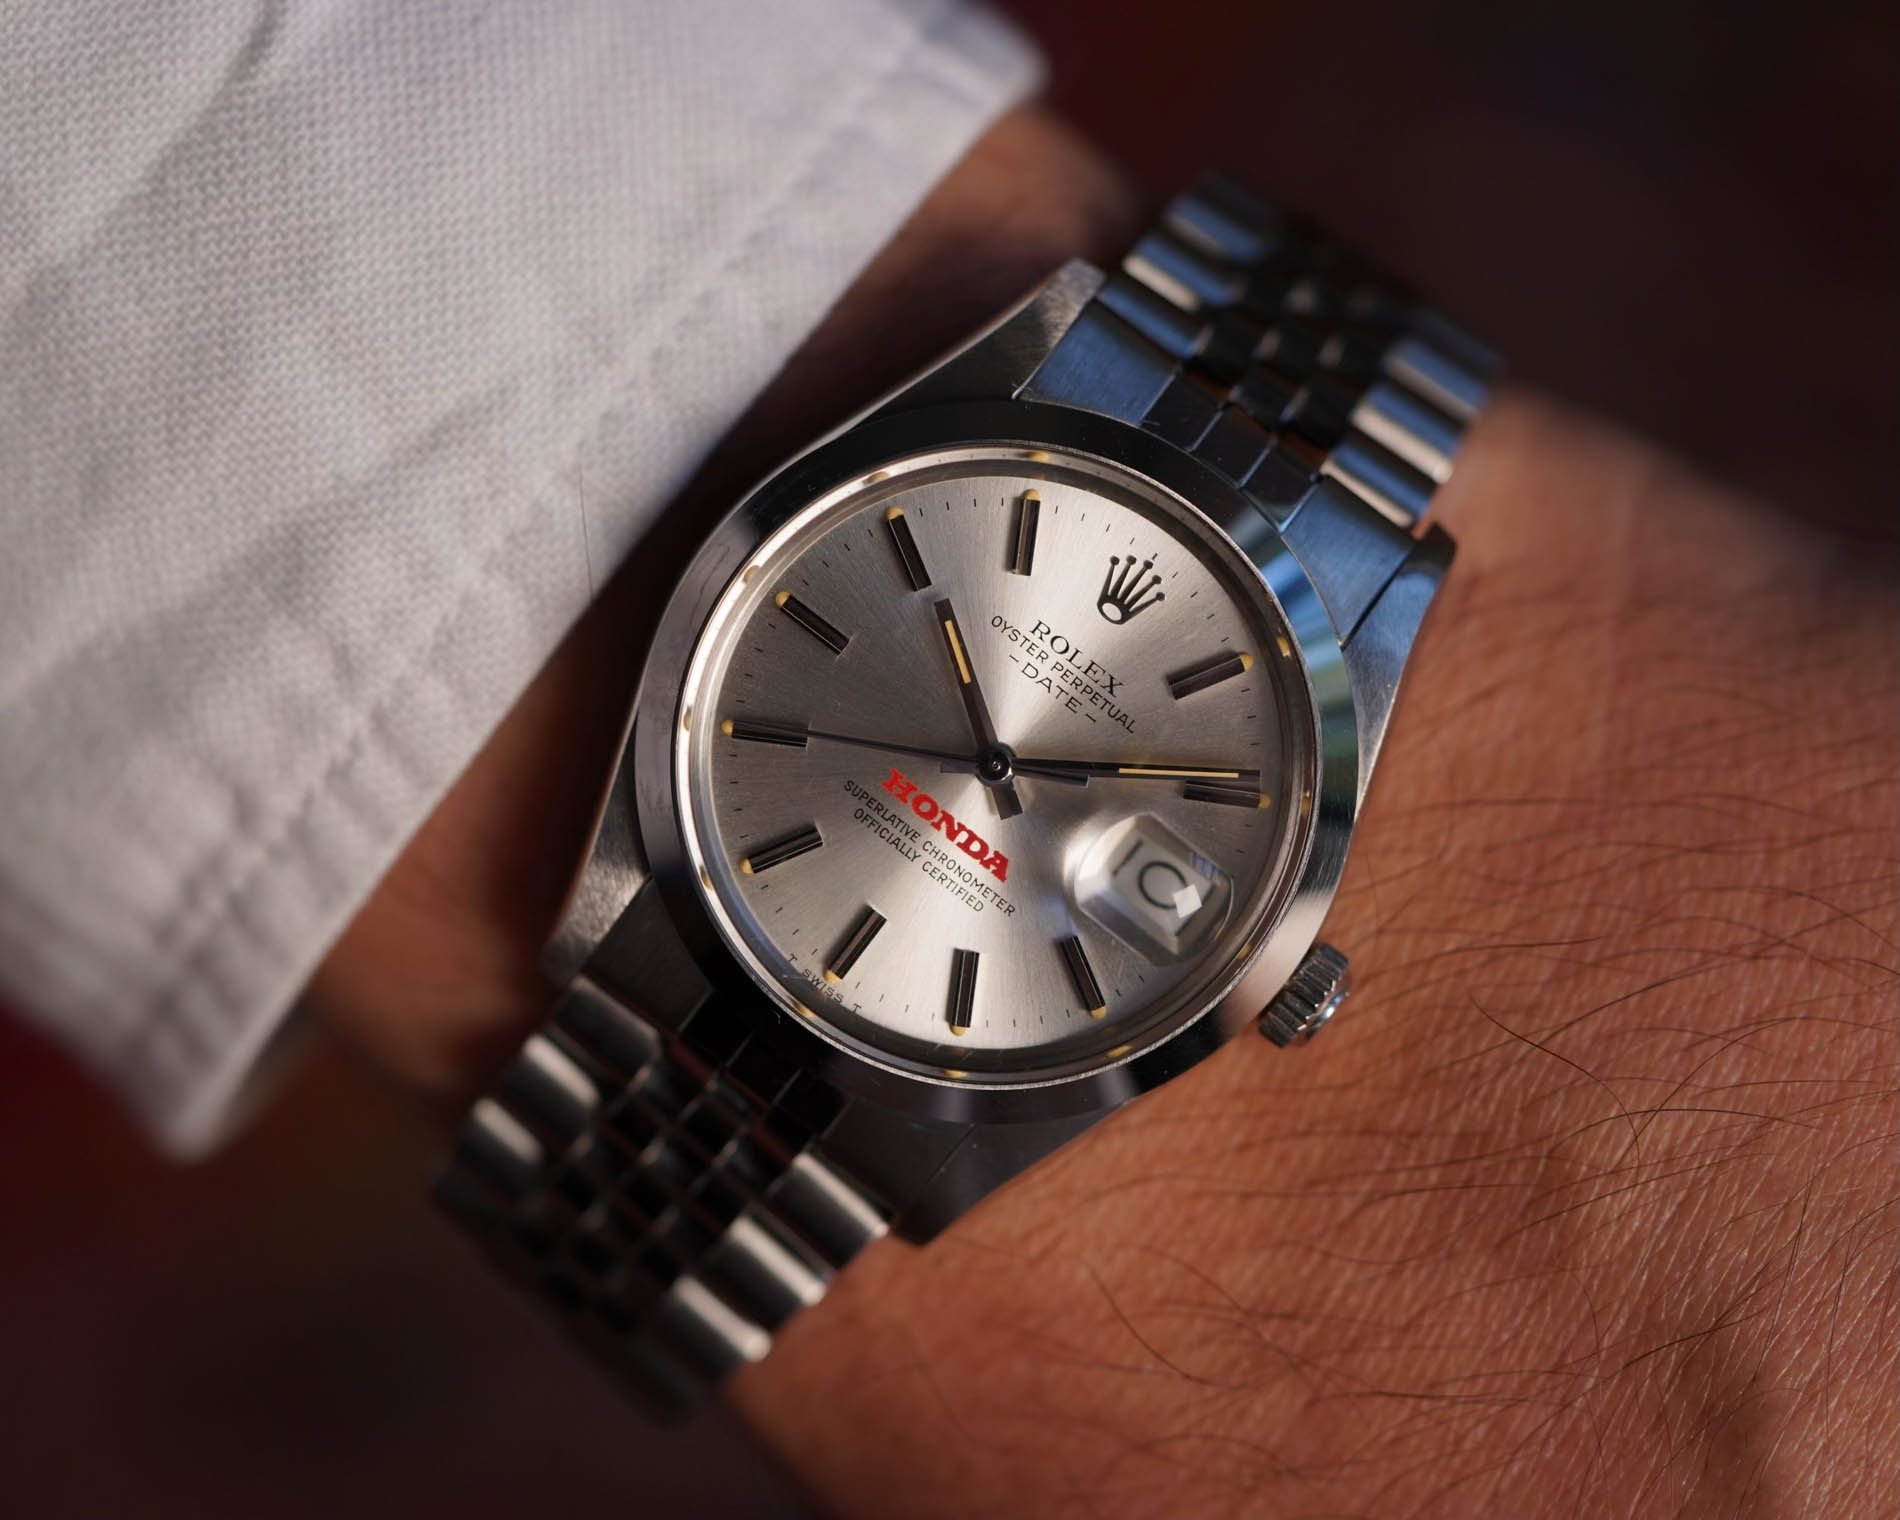 #TBT Three Honda Watches I Wanted — A Rolex Date, Steering Wheel, And Cheap Quartz F-1